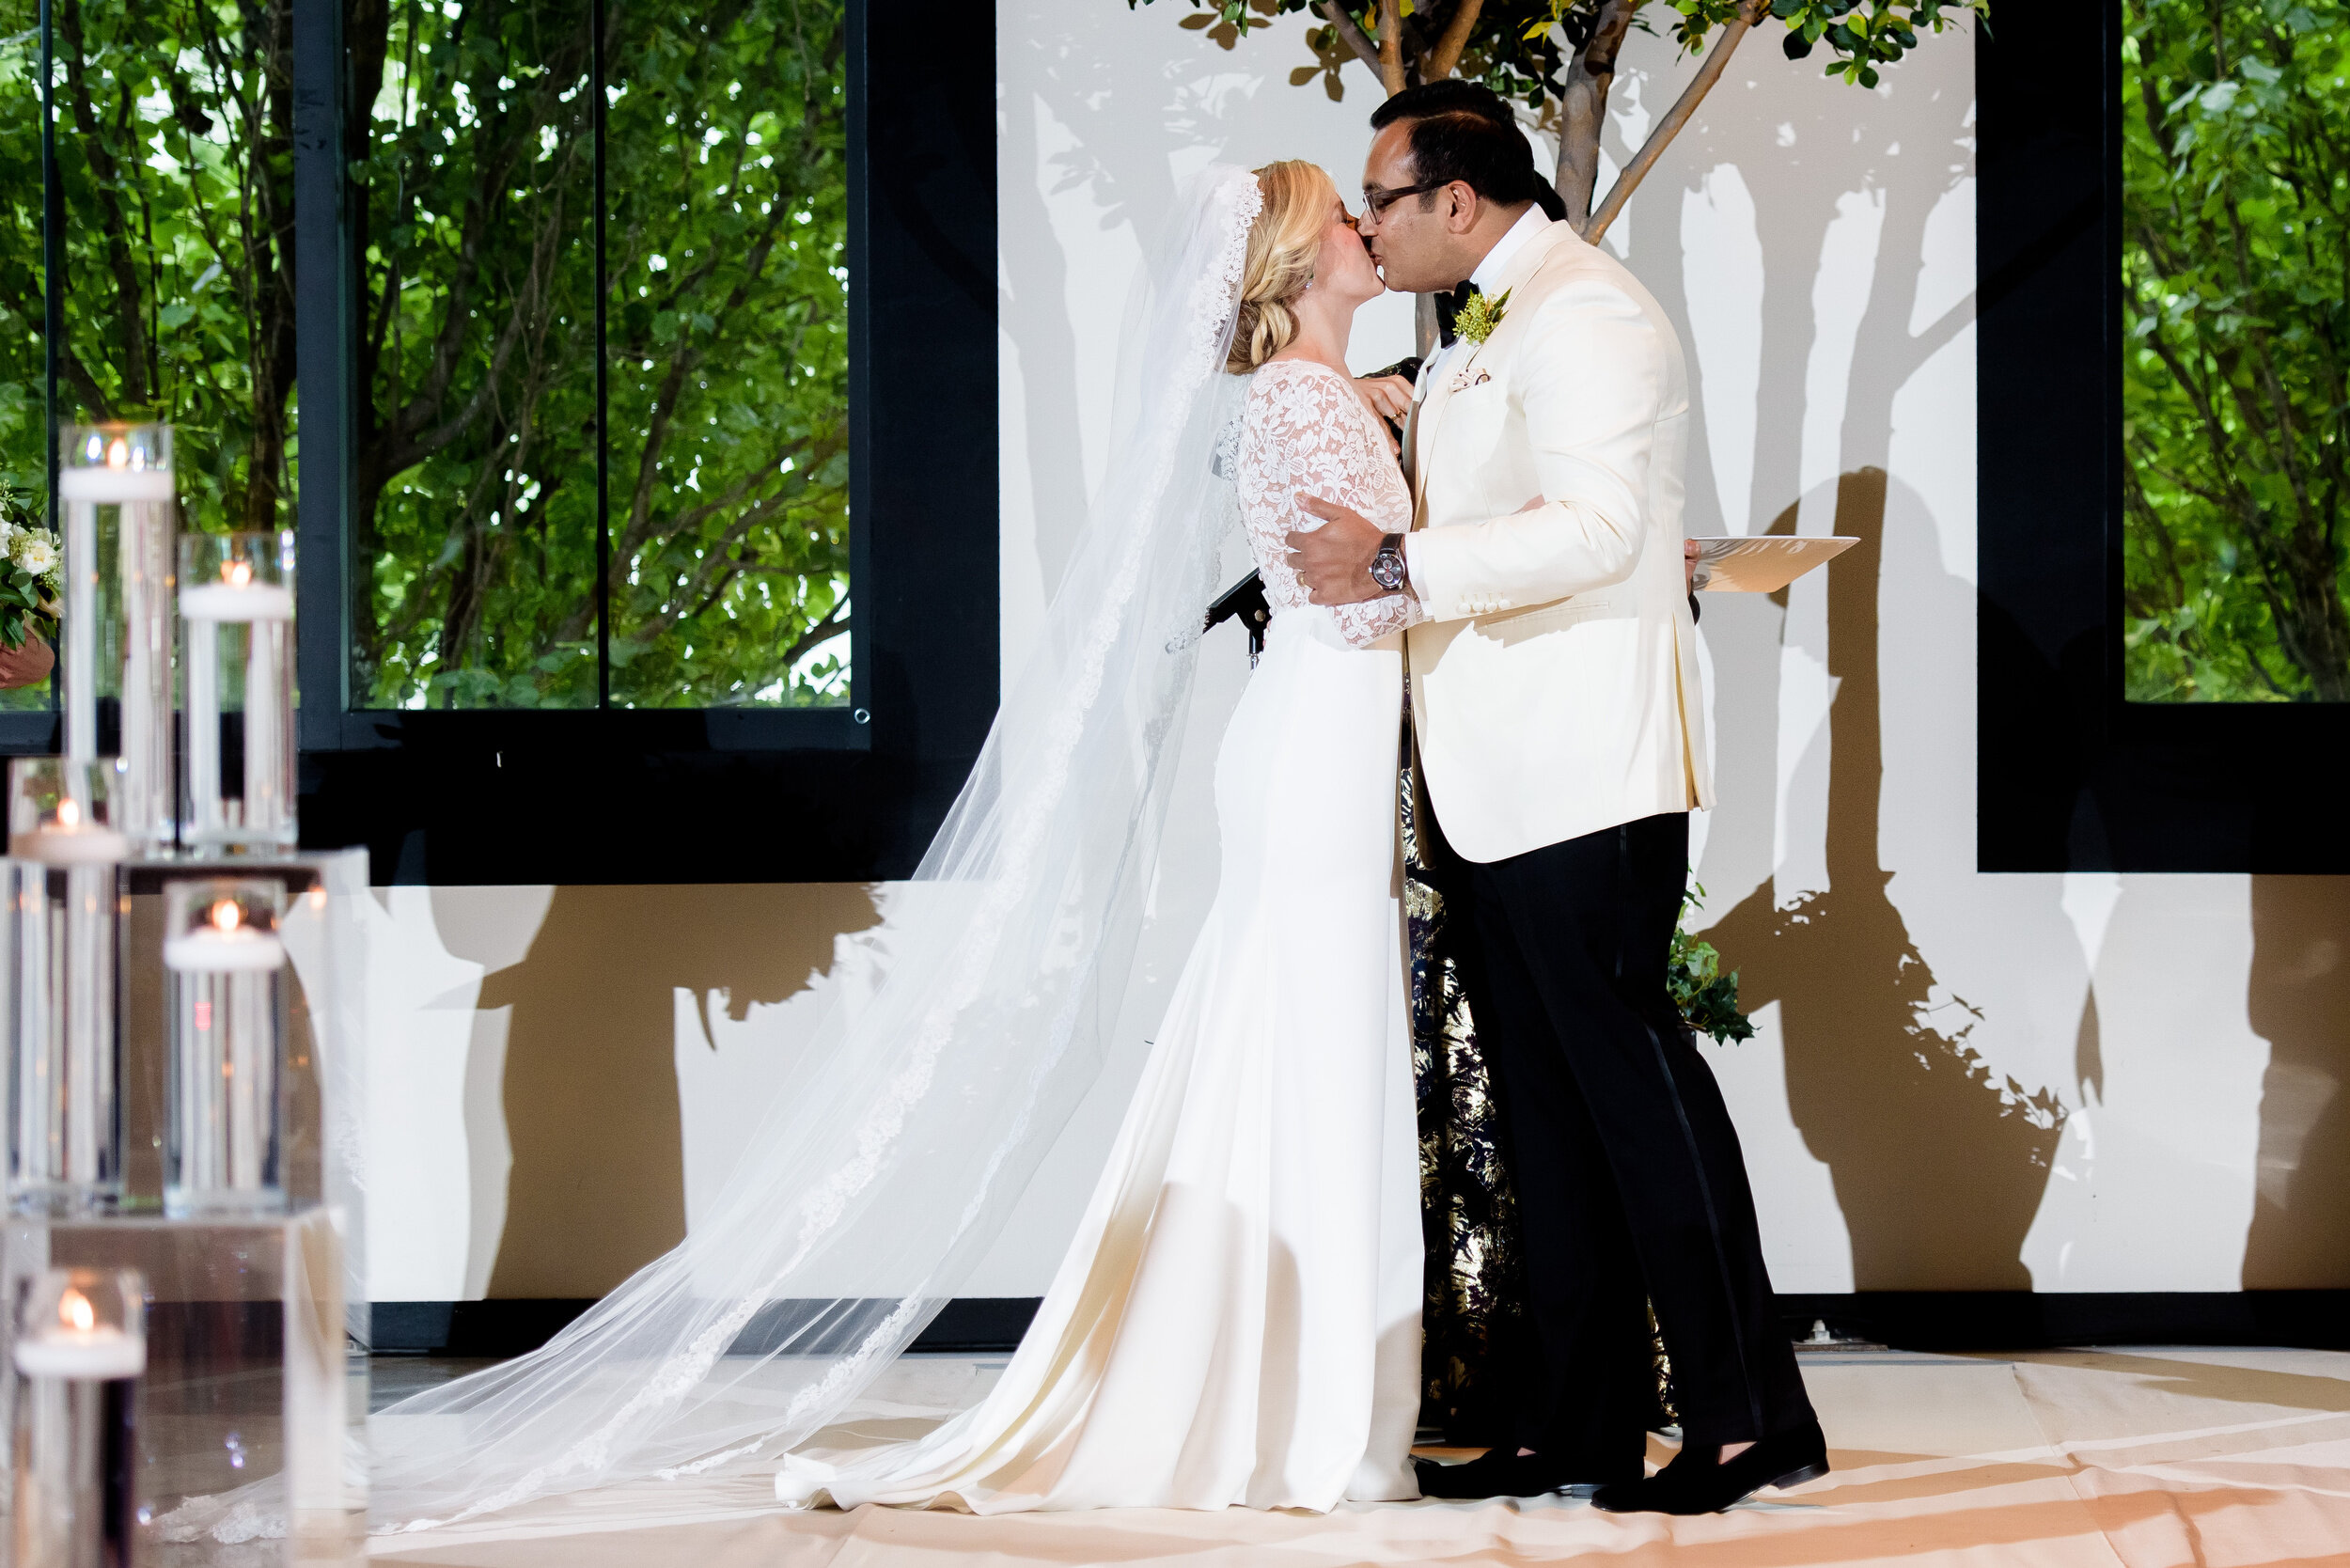 First kiss during the wedding ceremony: Geraghty Chicago wedding photography captured by J. Brown Photography.